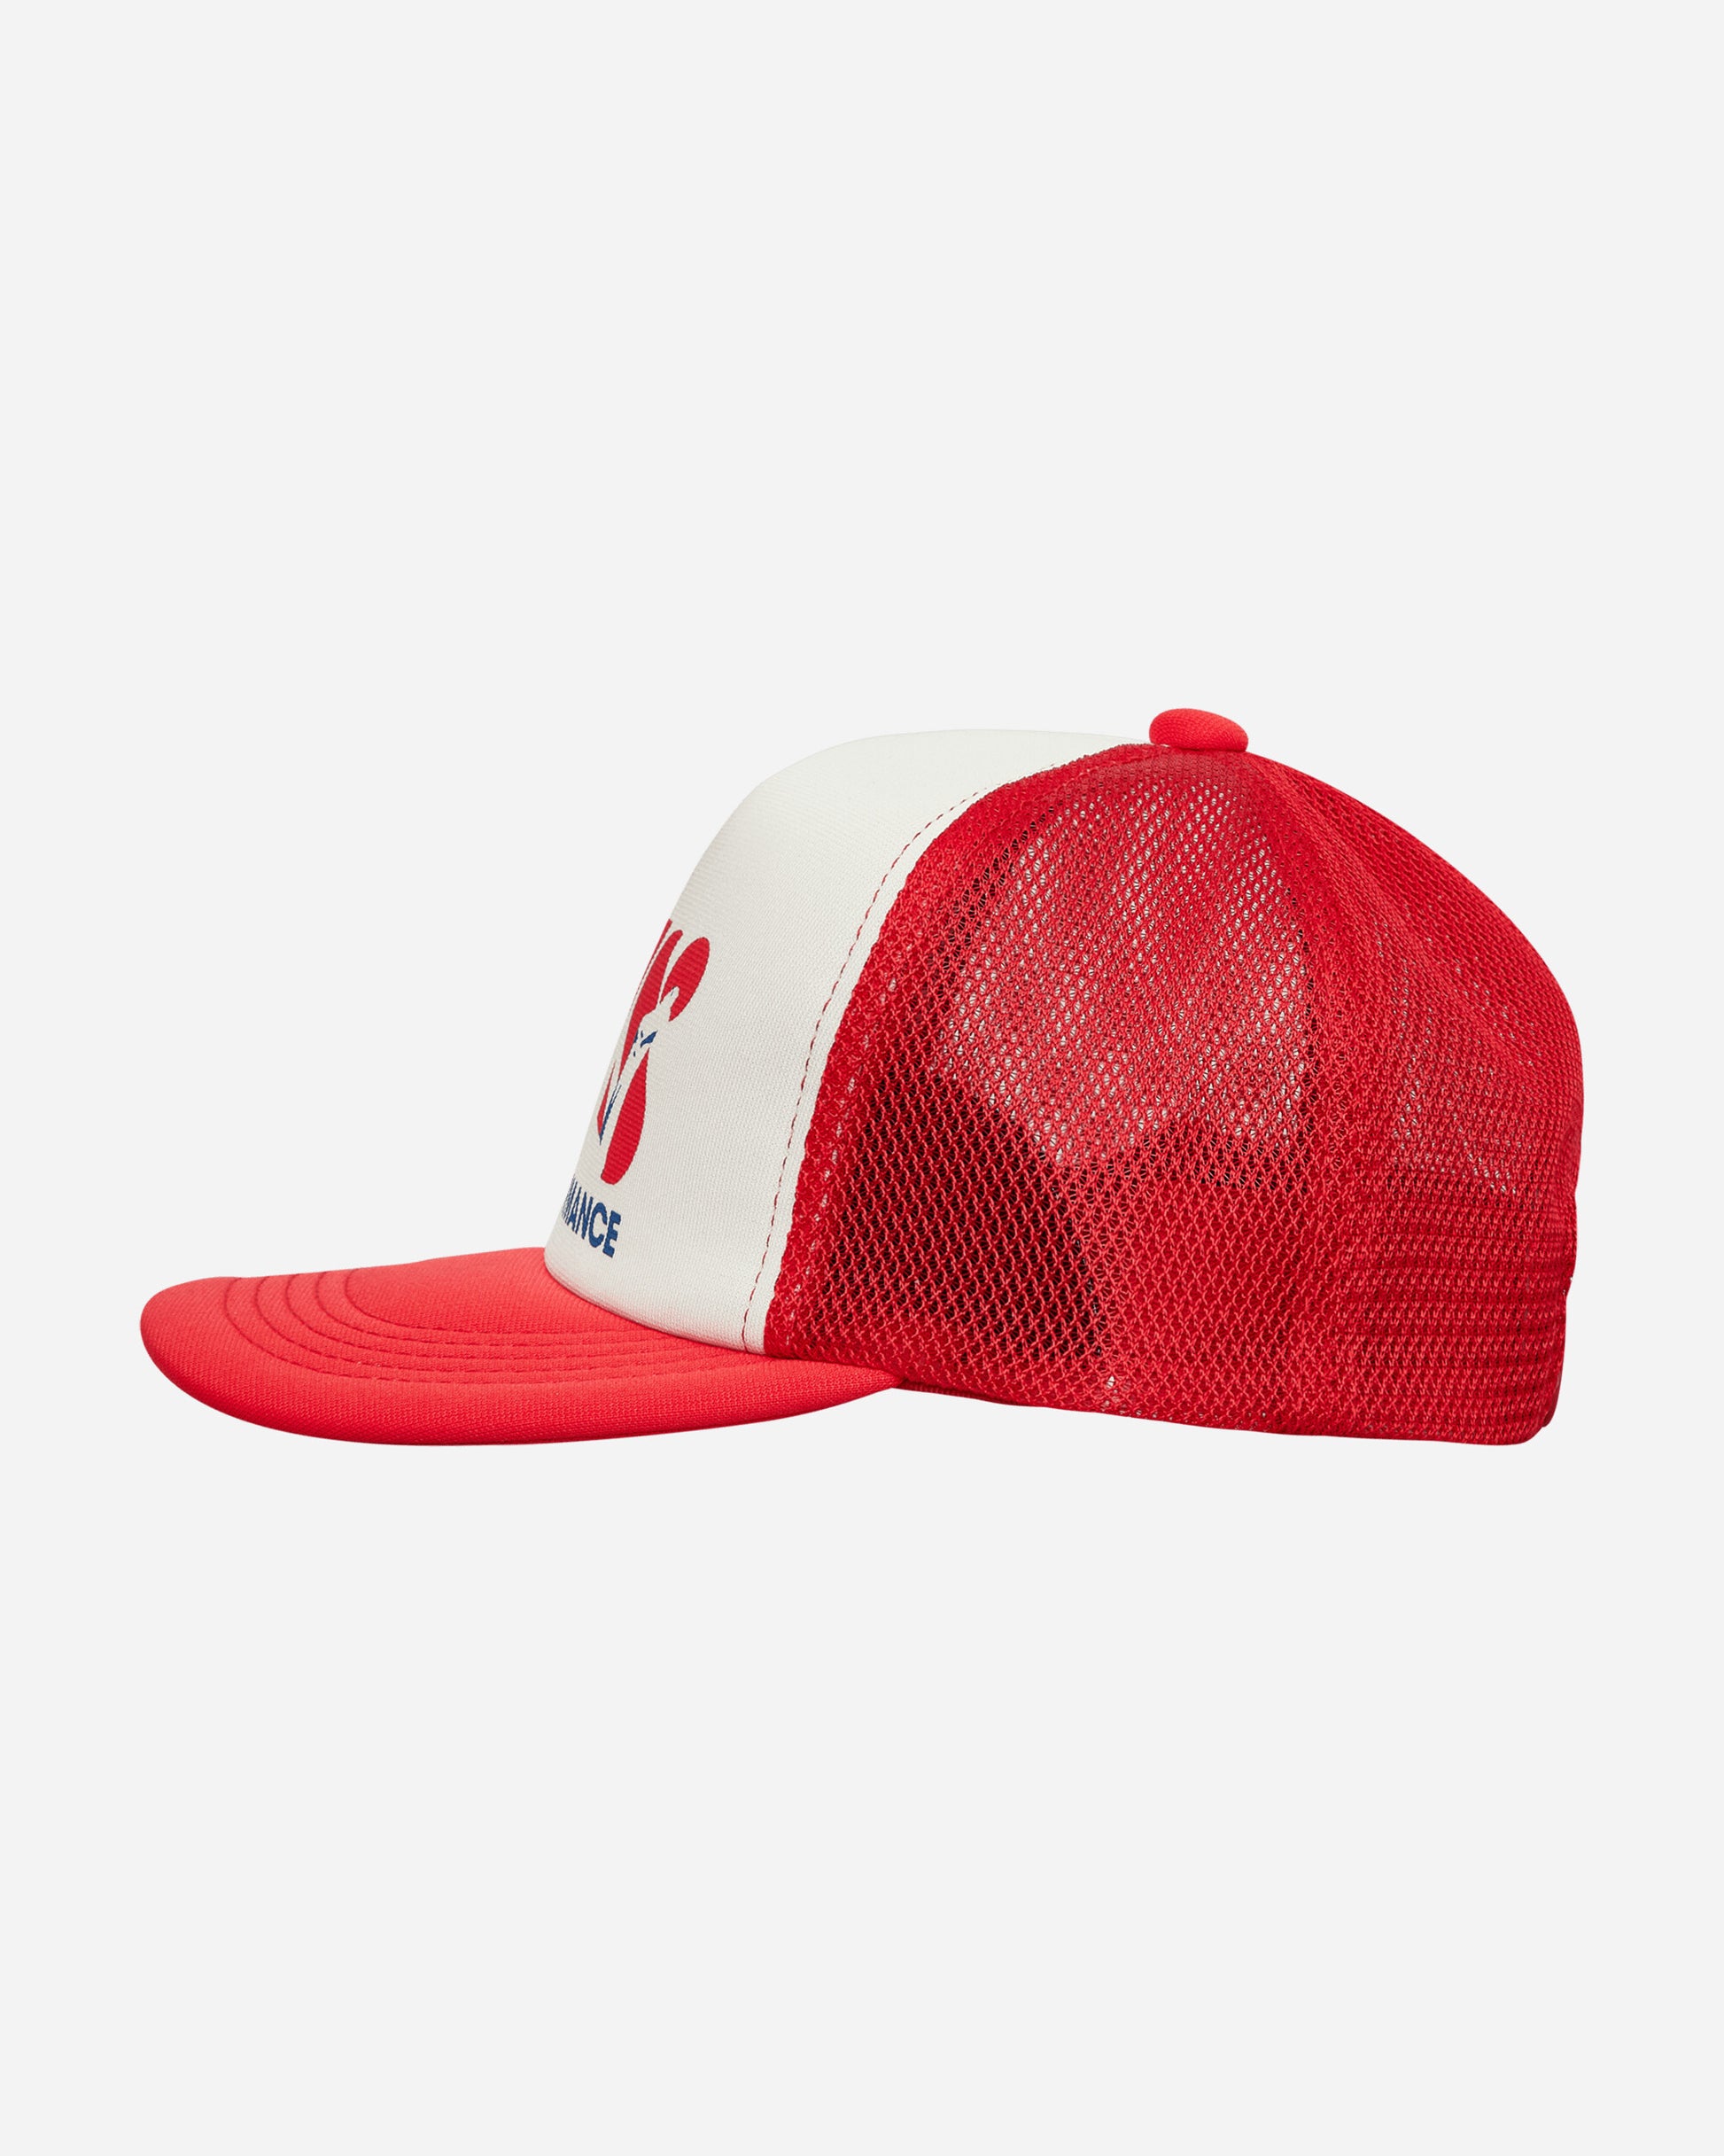 Hysteric Glamour High Performance Red Hats Caps 02241QH039 A